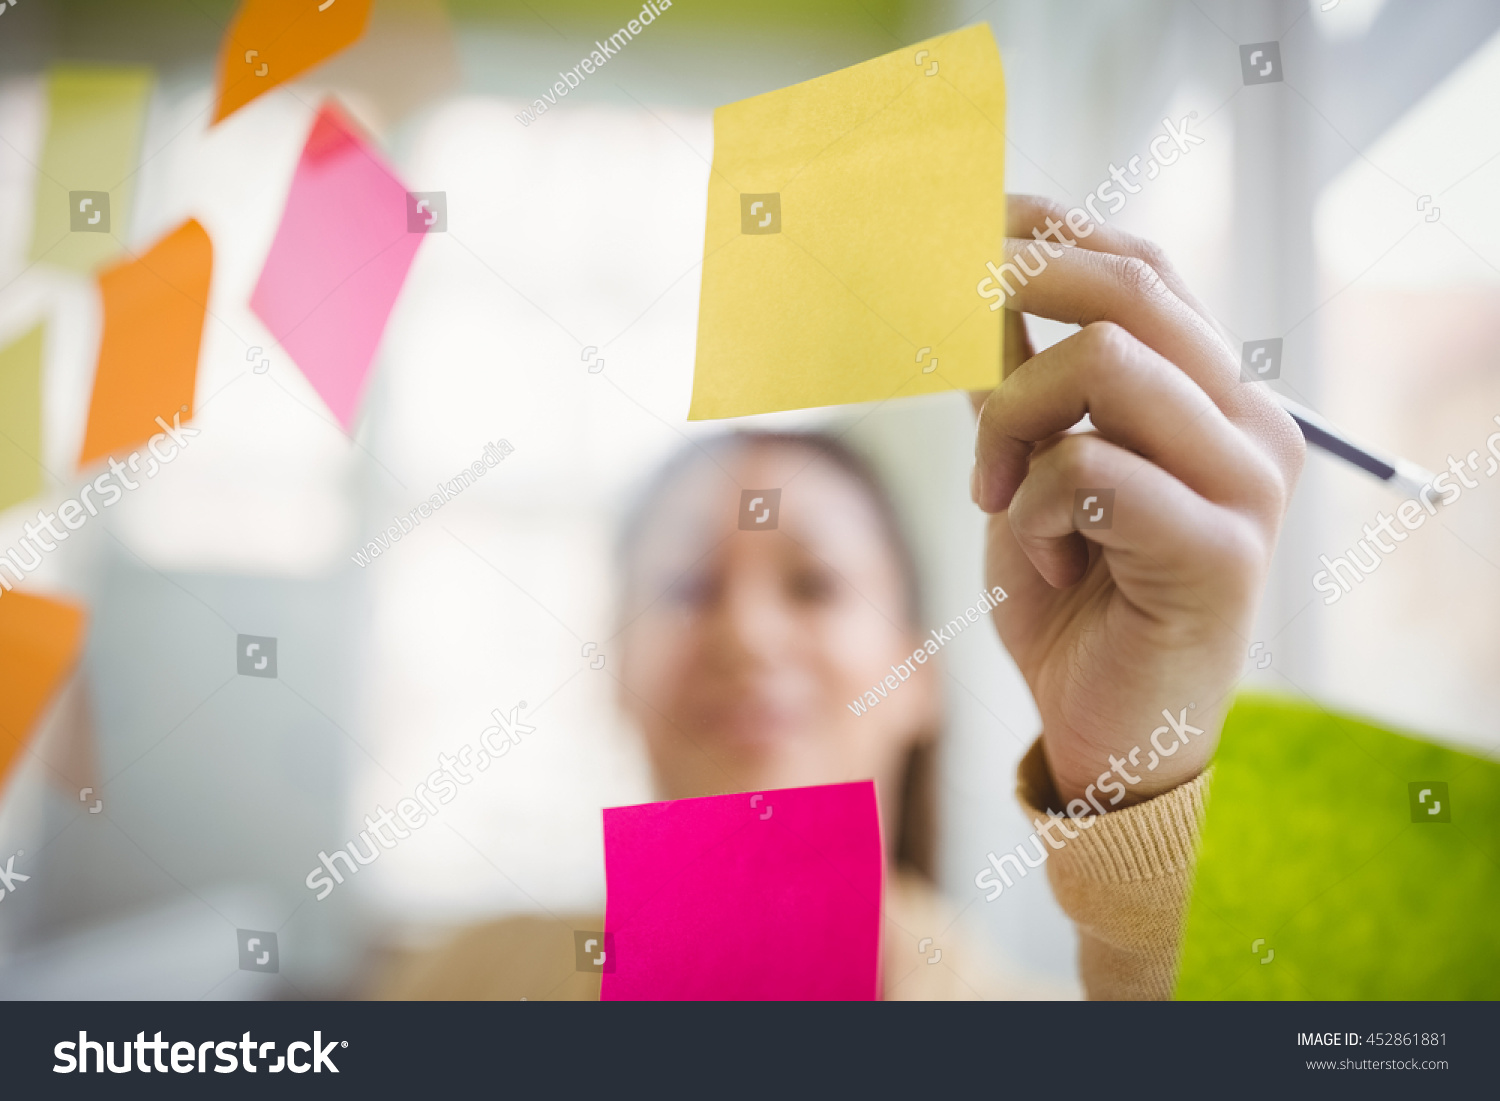 Businesswoman writing on adhesive notes in creative office #452861881